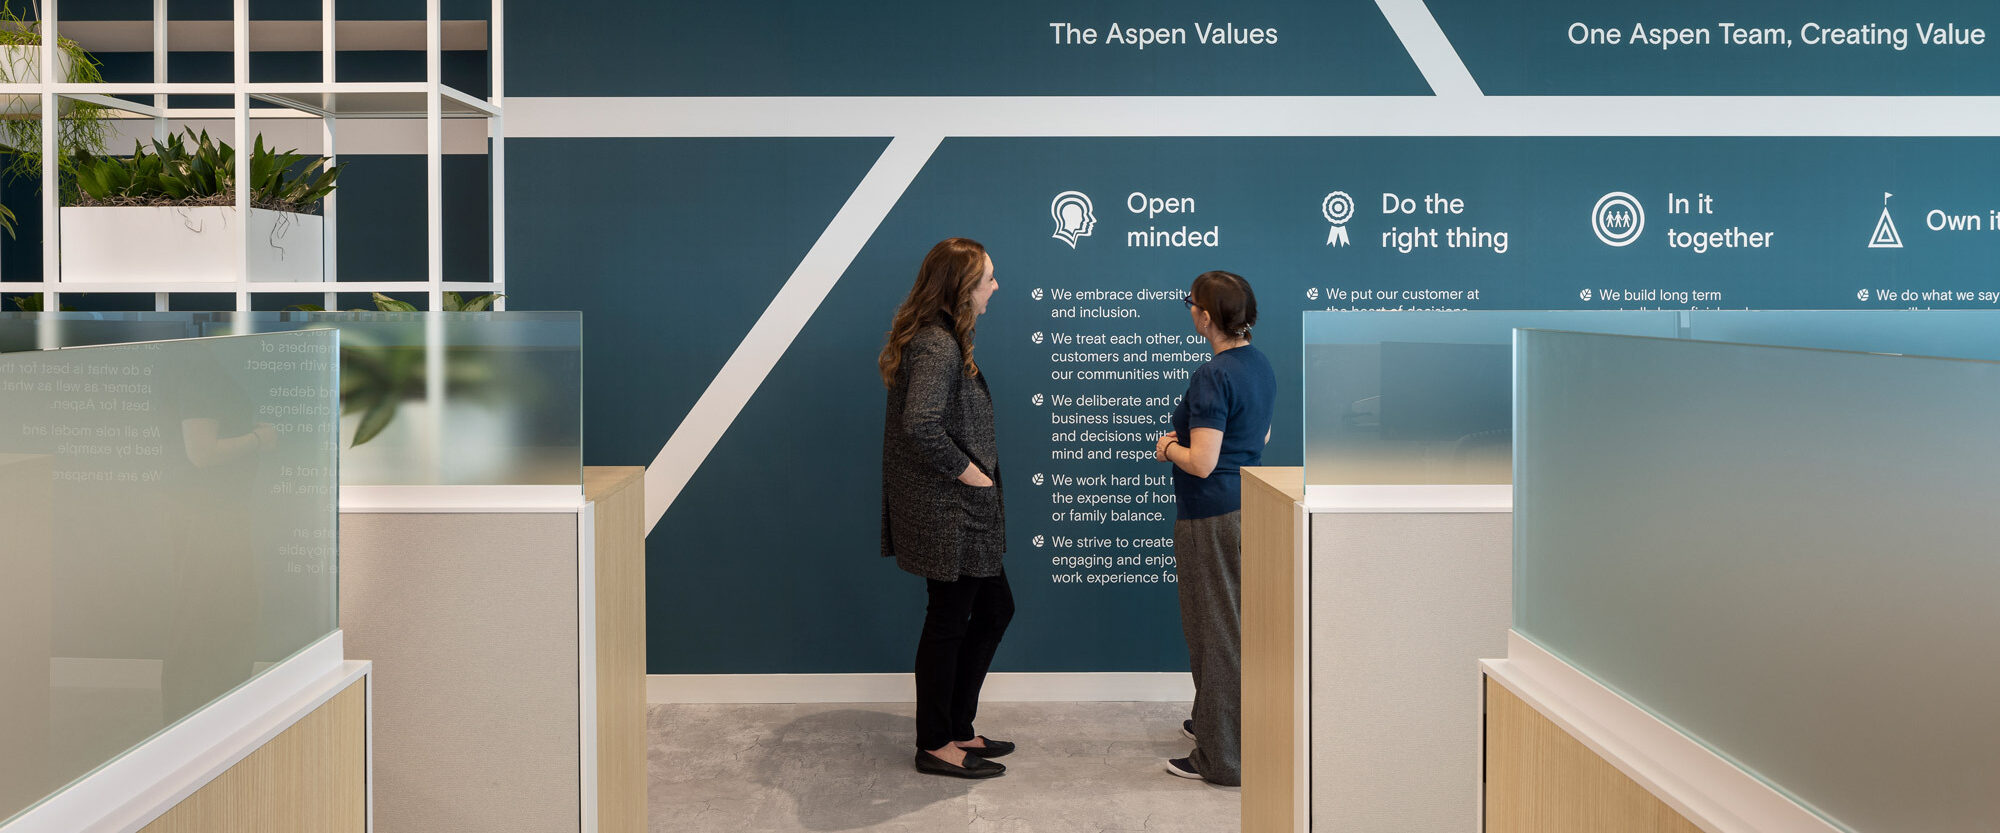 Modern office lobby featuring a geometric patterned accent wall with the company’s core values displayed, fostering a collaborative atmosphere as two professionals engage in conversation.